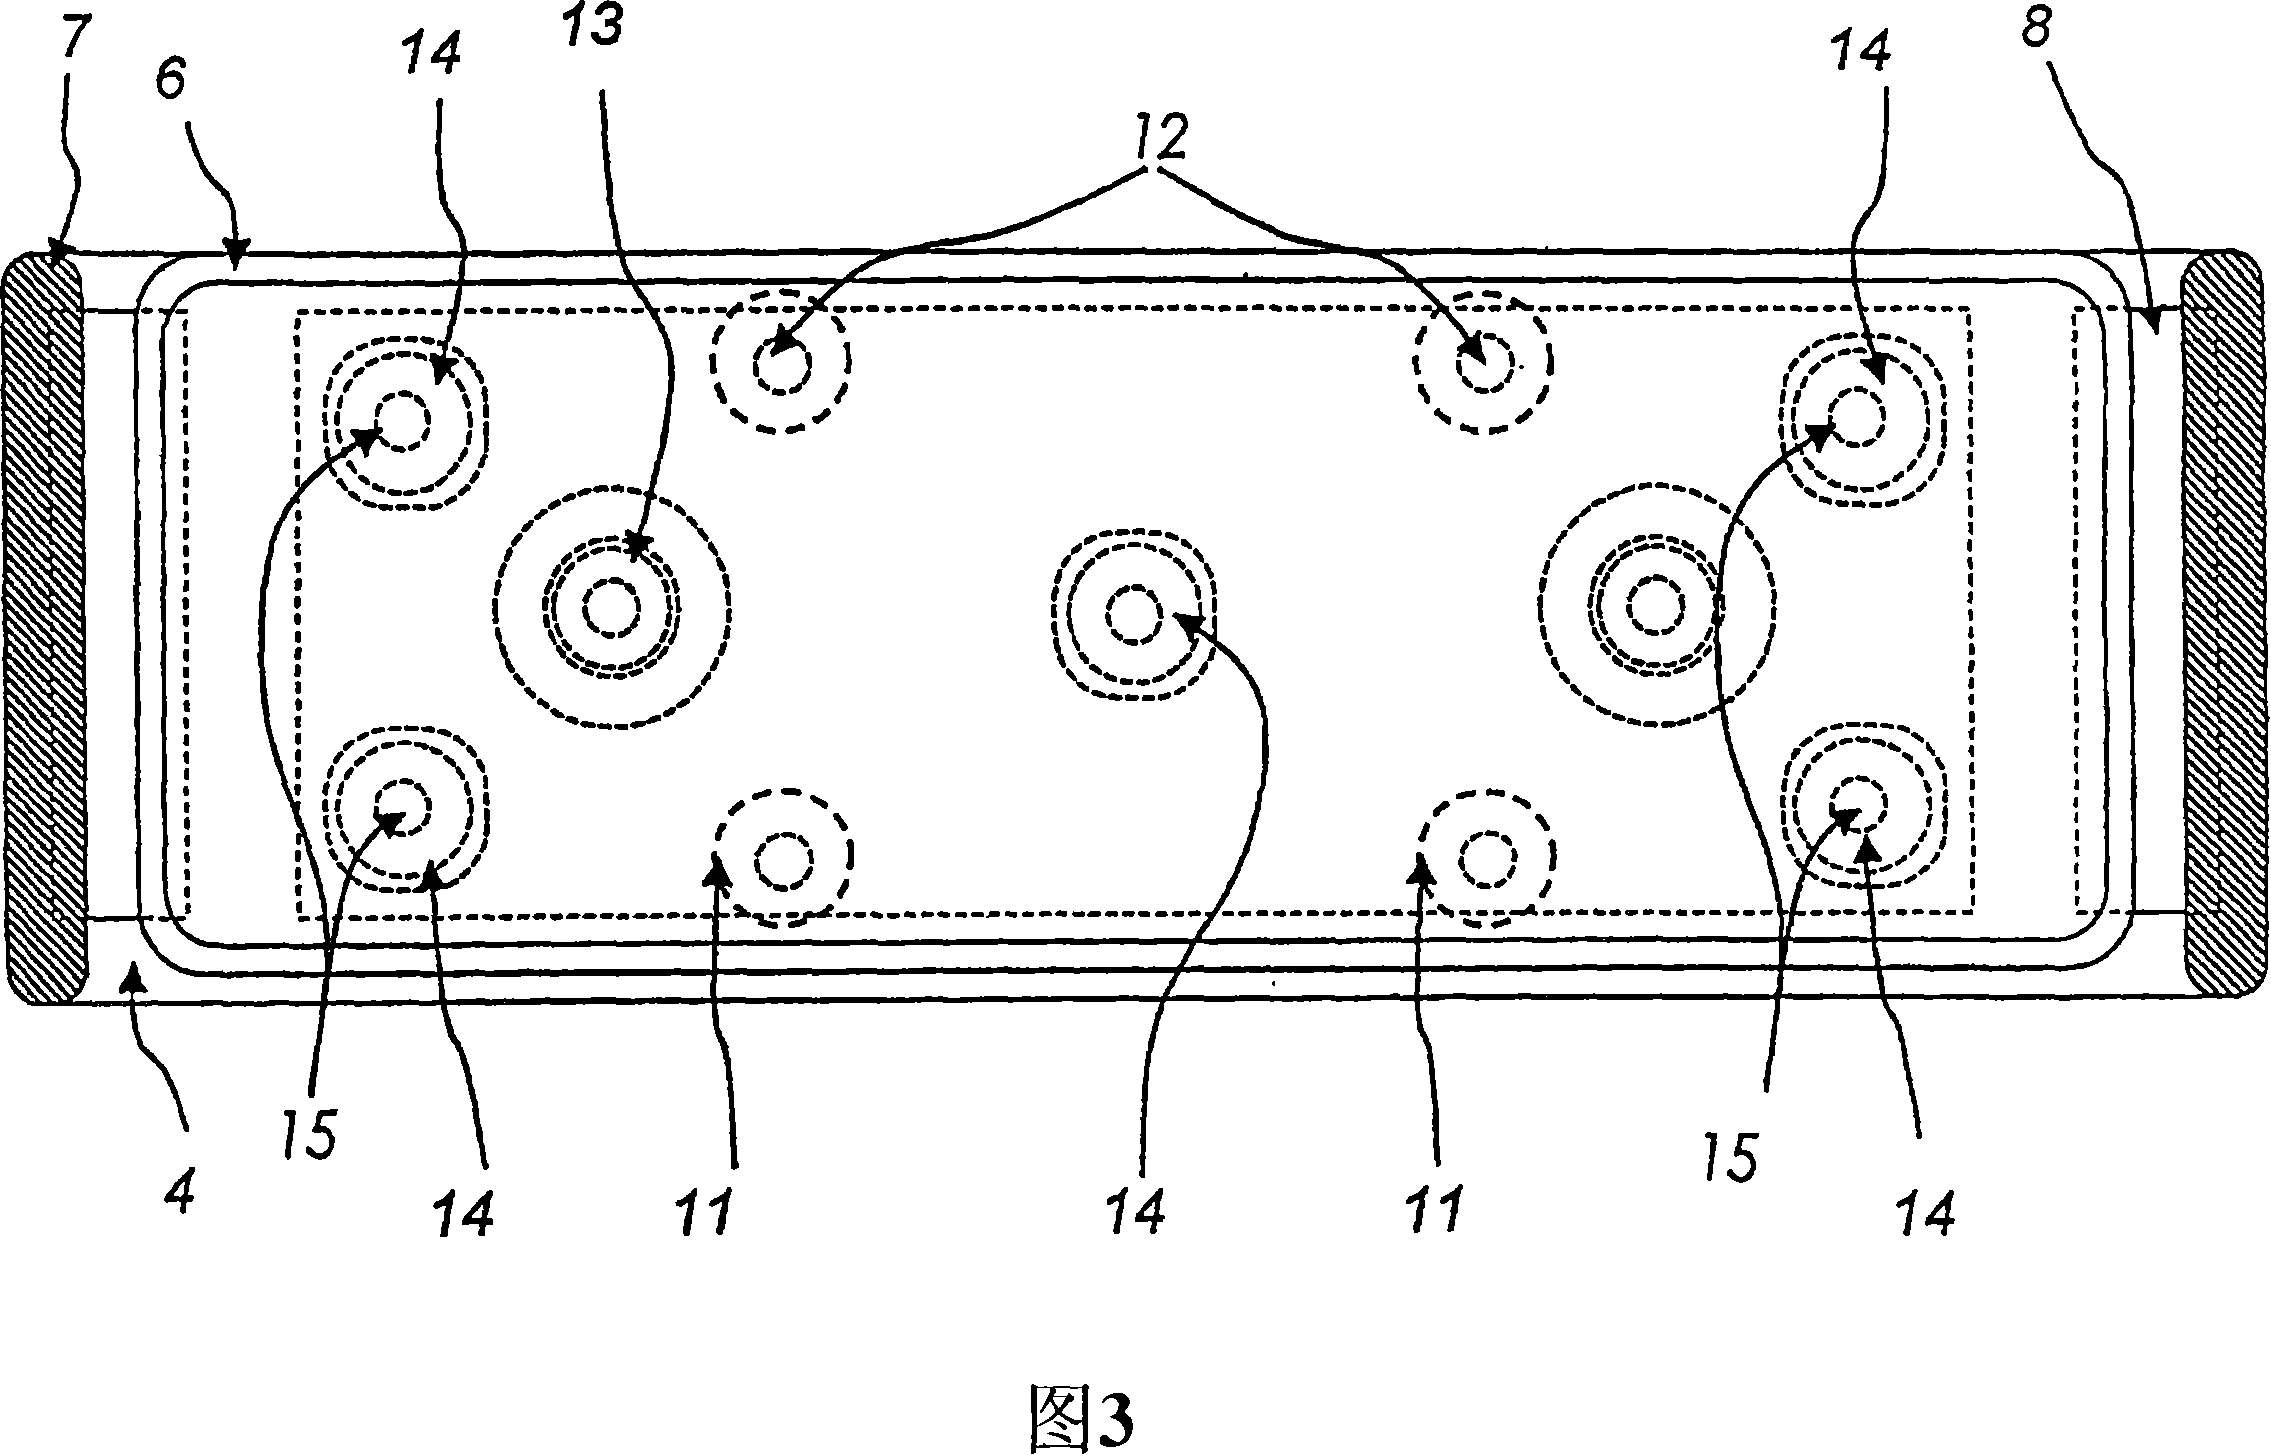 Seating or reclining furniture comprising a vibrating device for improving blood circulation